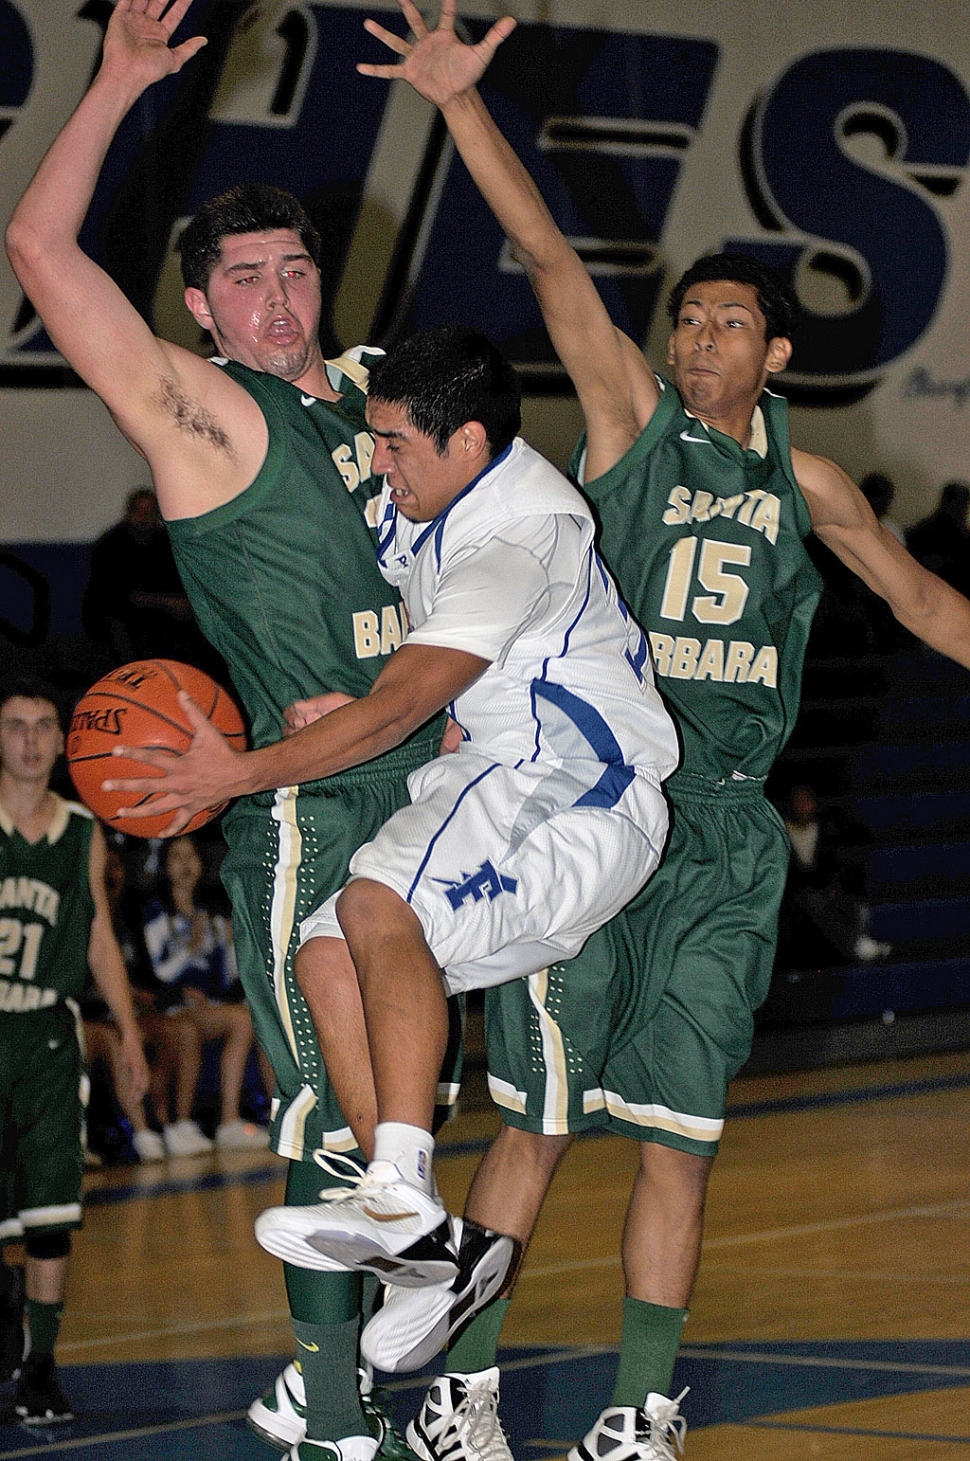 Tuesday, November 27, the Fillmore Flashes Boys Basketball team played against Santa Barabra Dons. The boys played a tough game but lost 67-21. Adrian Rangel was the leading rebounder for the game. On Monday Fillmore beat Hueneme 58-42. Jalen Rhodes pictured above was the leading scorer with 21 points.